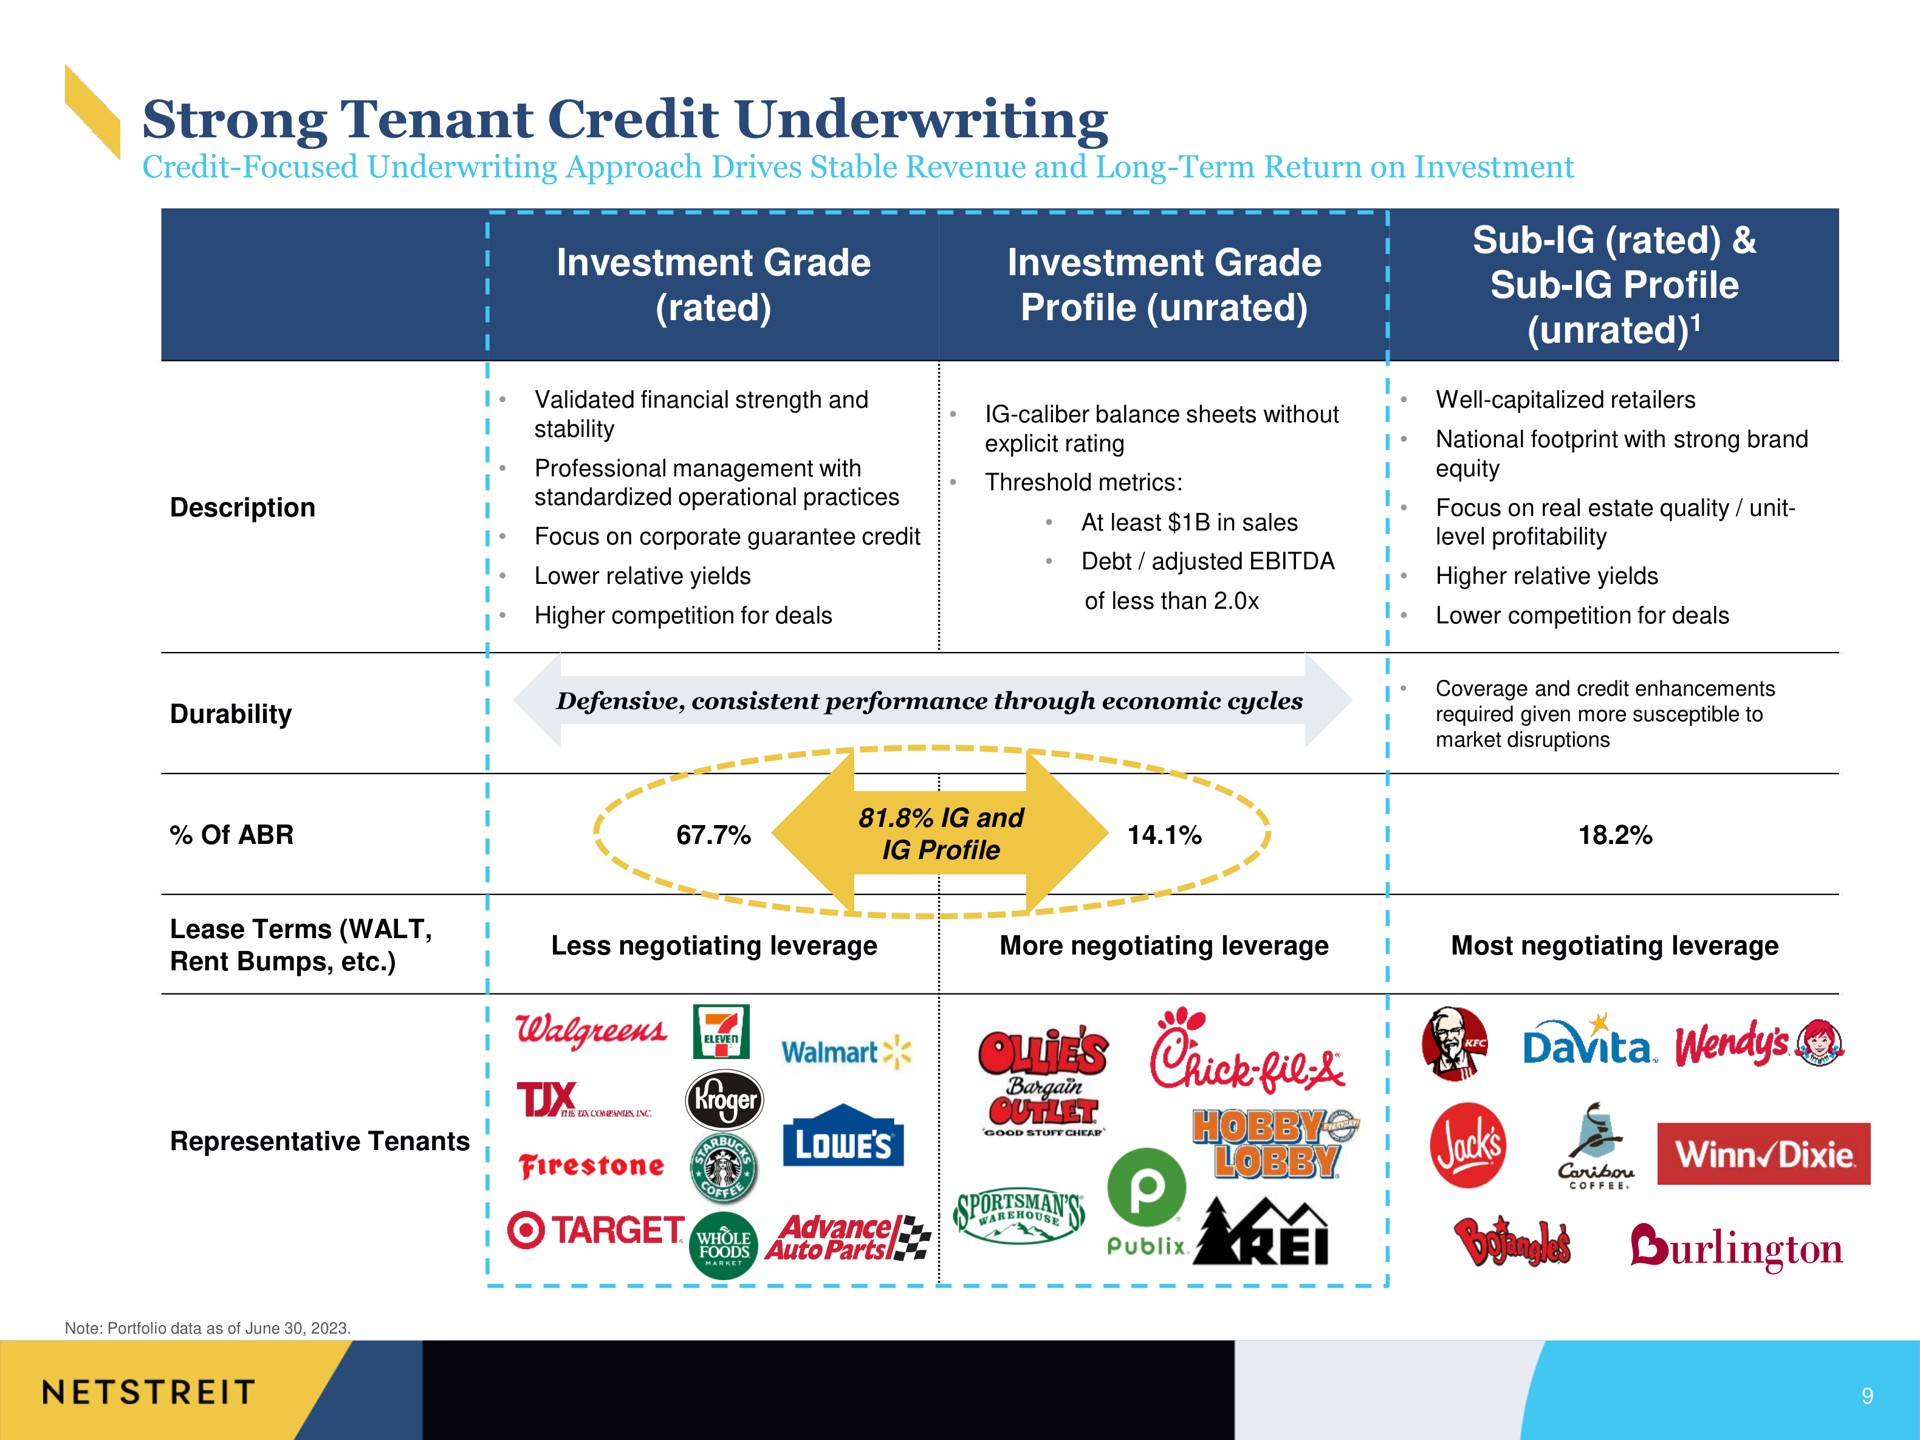 strong tenant credit underwriting investment grade rated investment grade profile unrated sub rated sub profile unrated cee | Netstreit